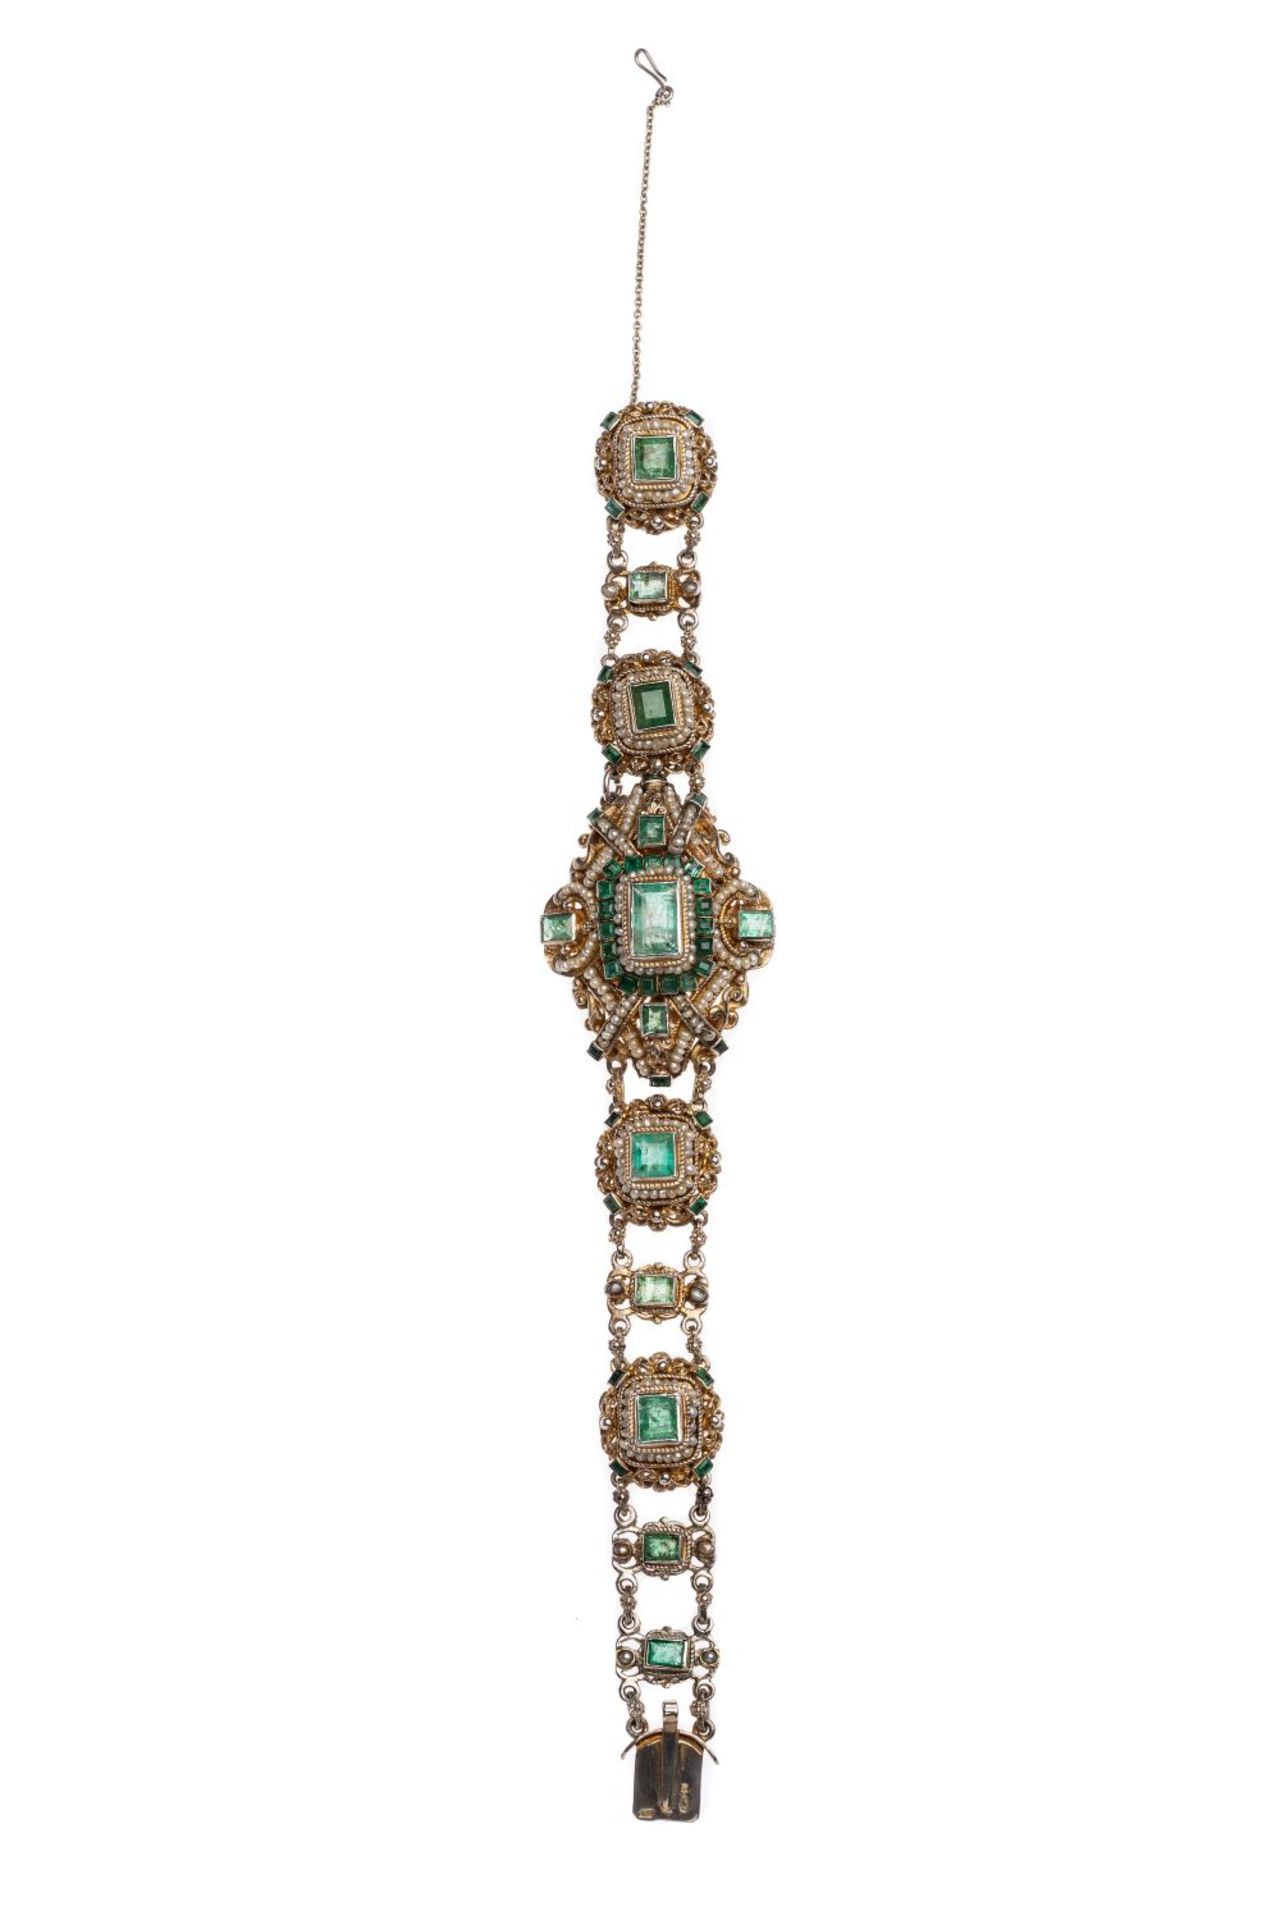 BraceletBracelet, silver, gilded, Emeralds from Habachtal (Austria) and pearls, "Neo Renaissance